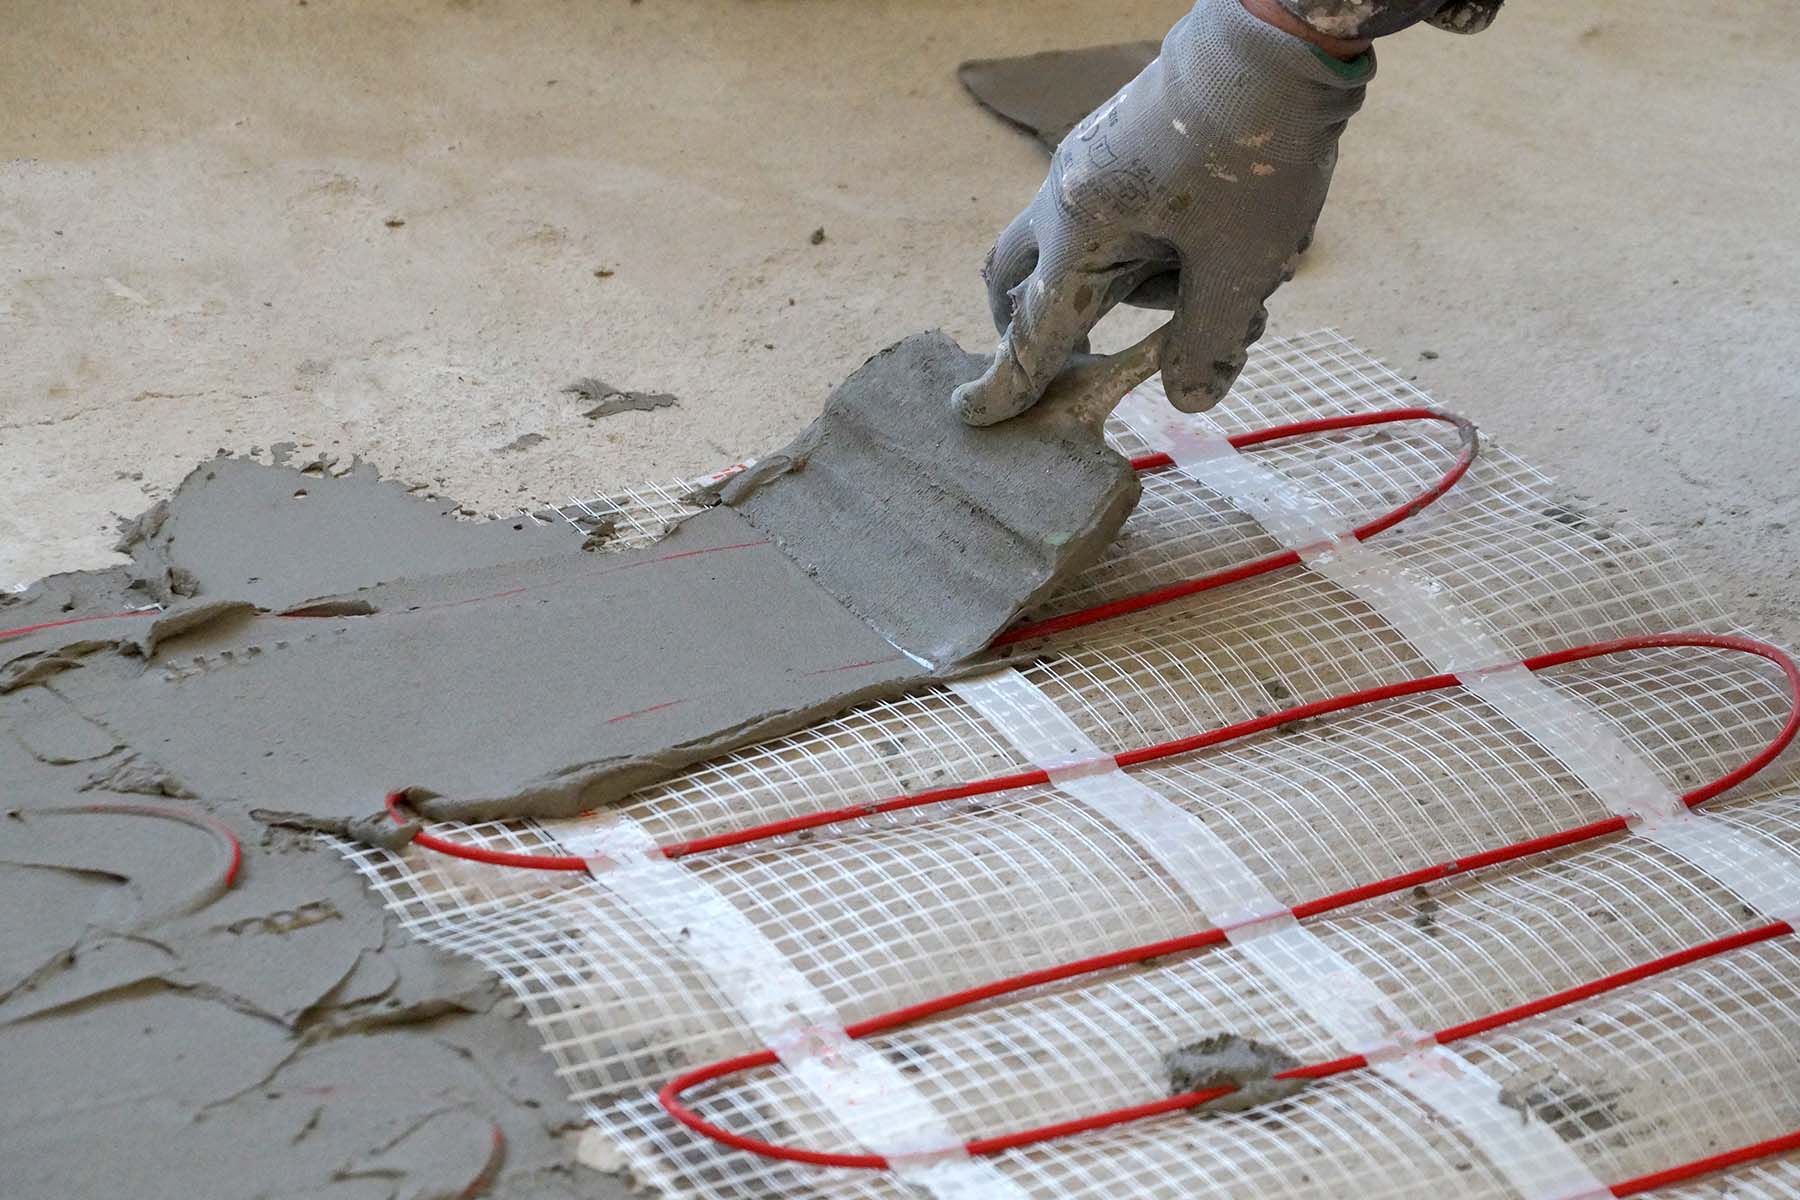 A Comprehensive Guide: How to Install Heated Floors on Concrete